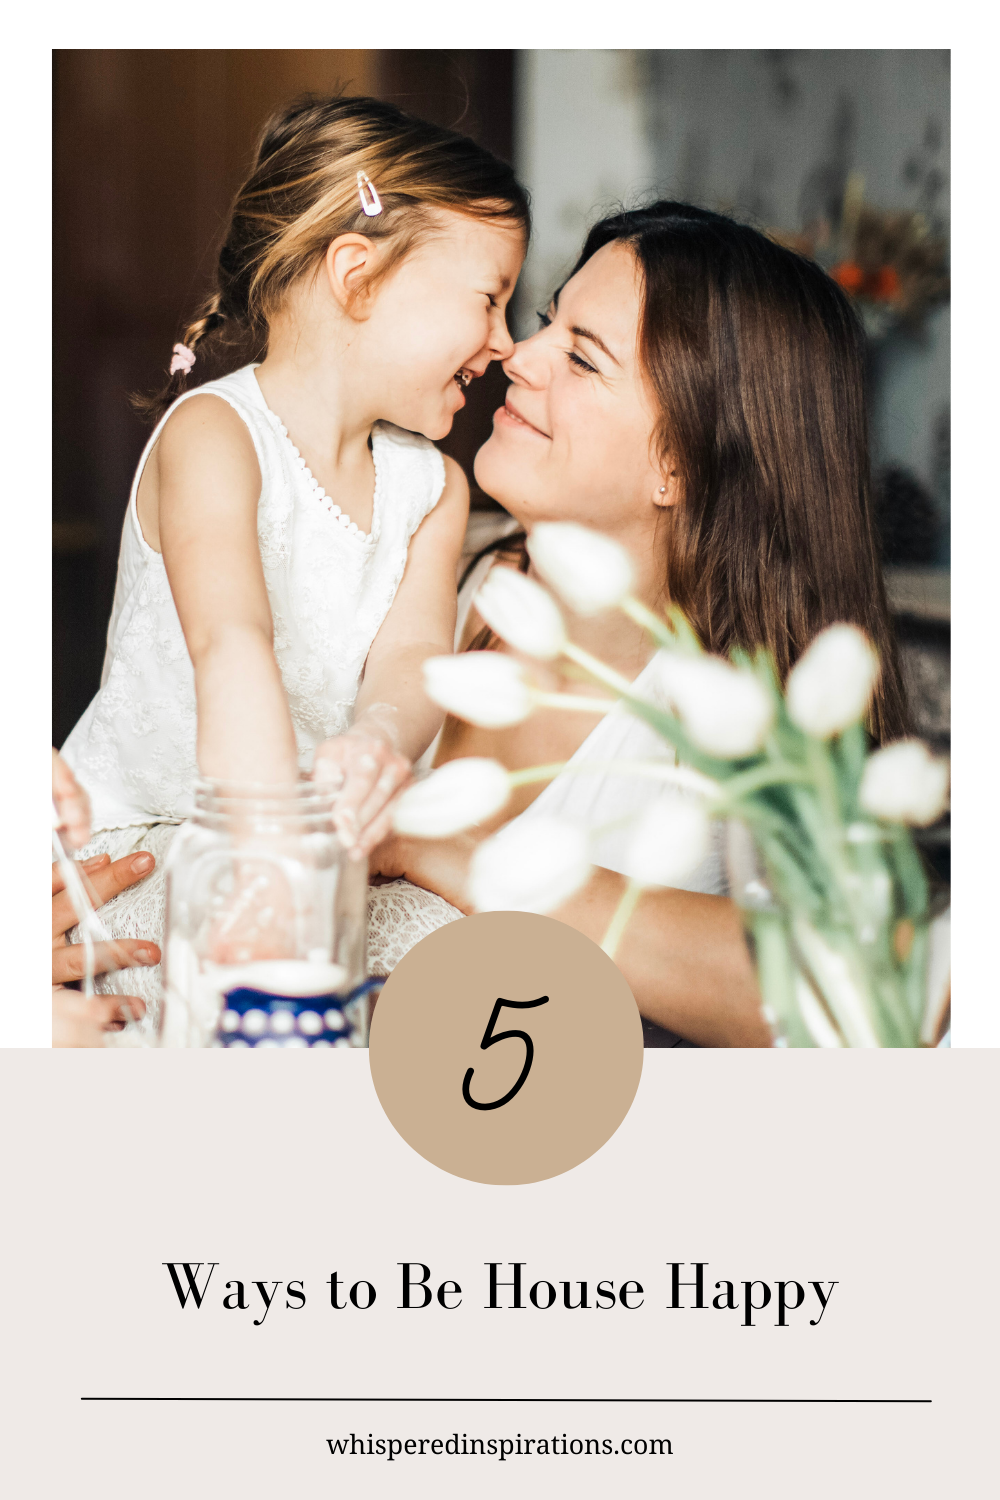 A mom and daughter touch noses and smile at each other. This article covers 5 ways to be house happy.